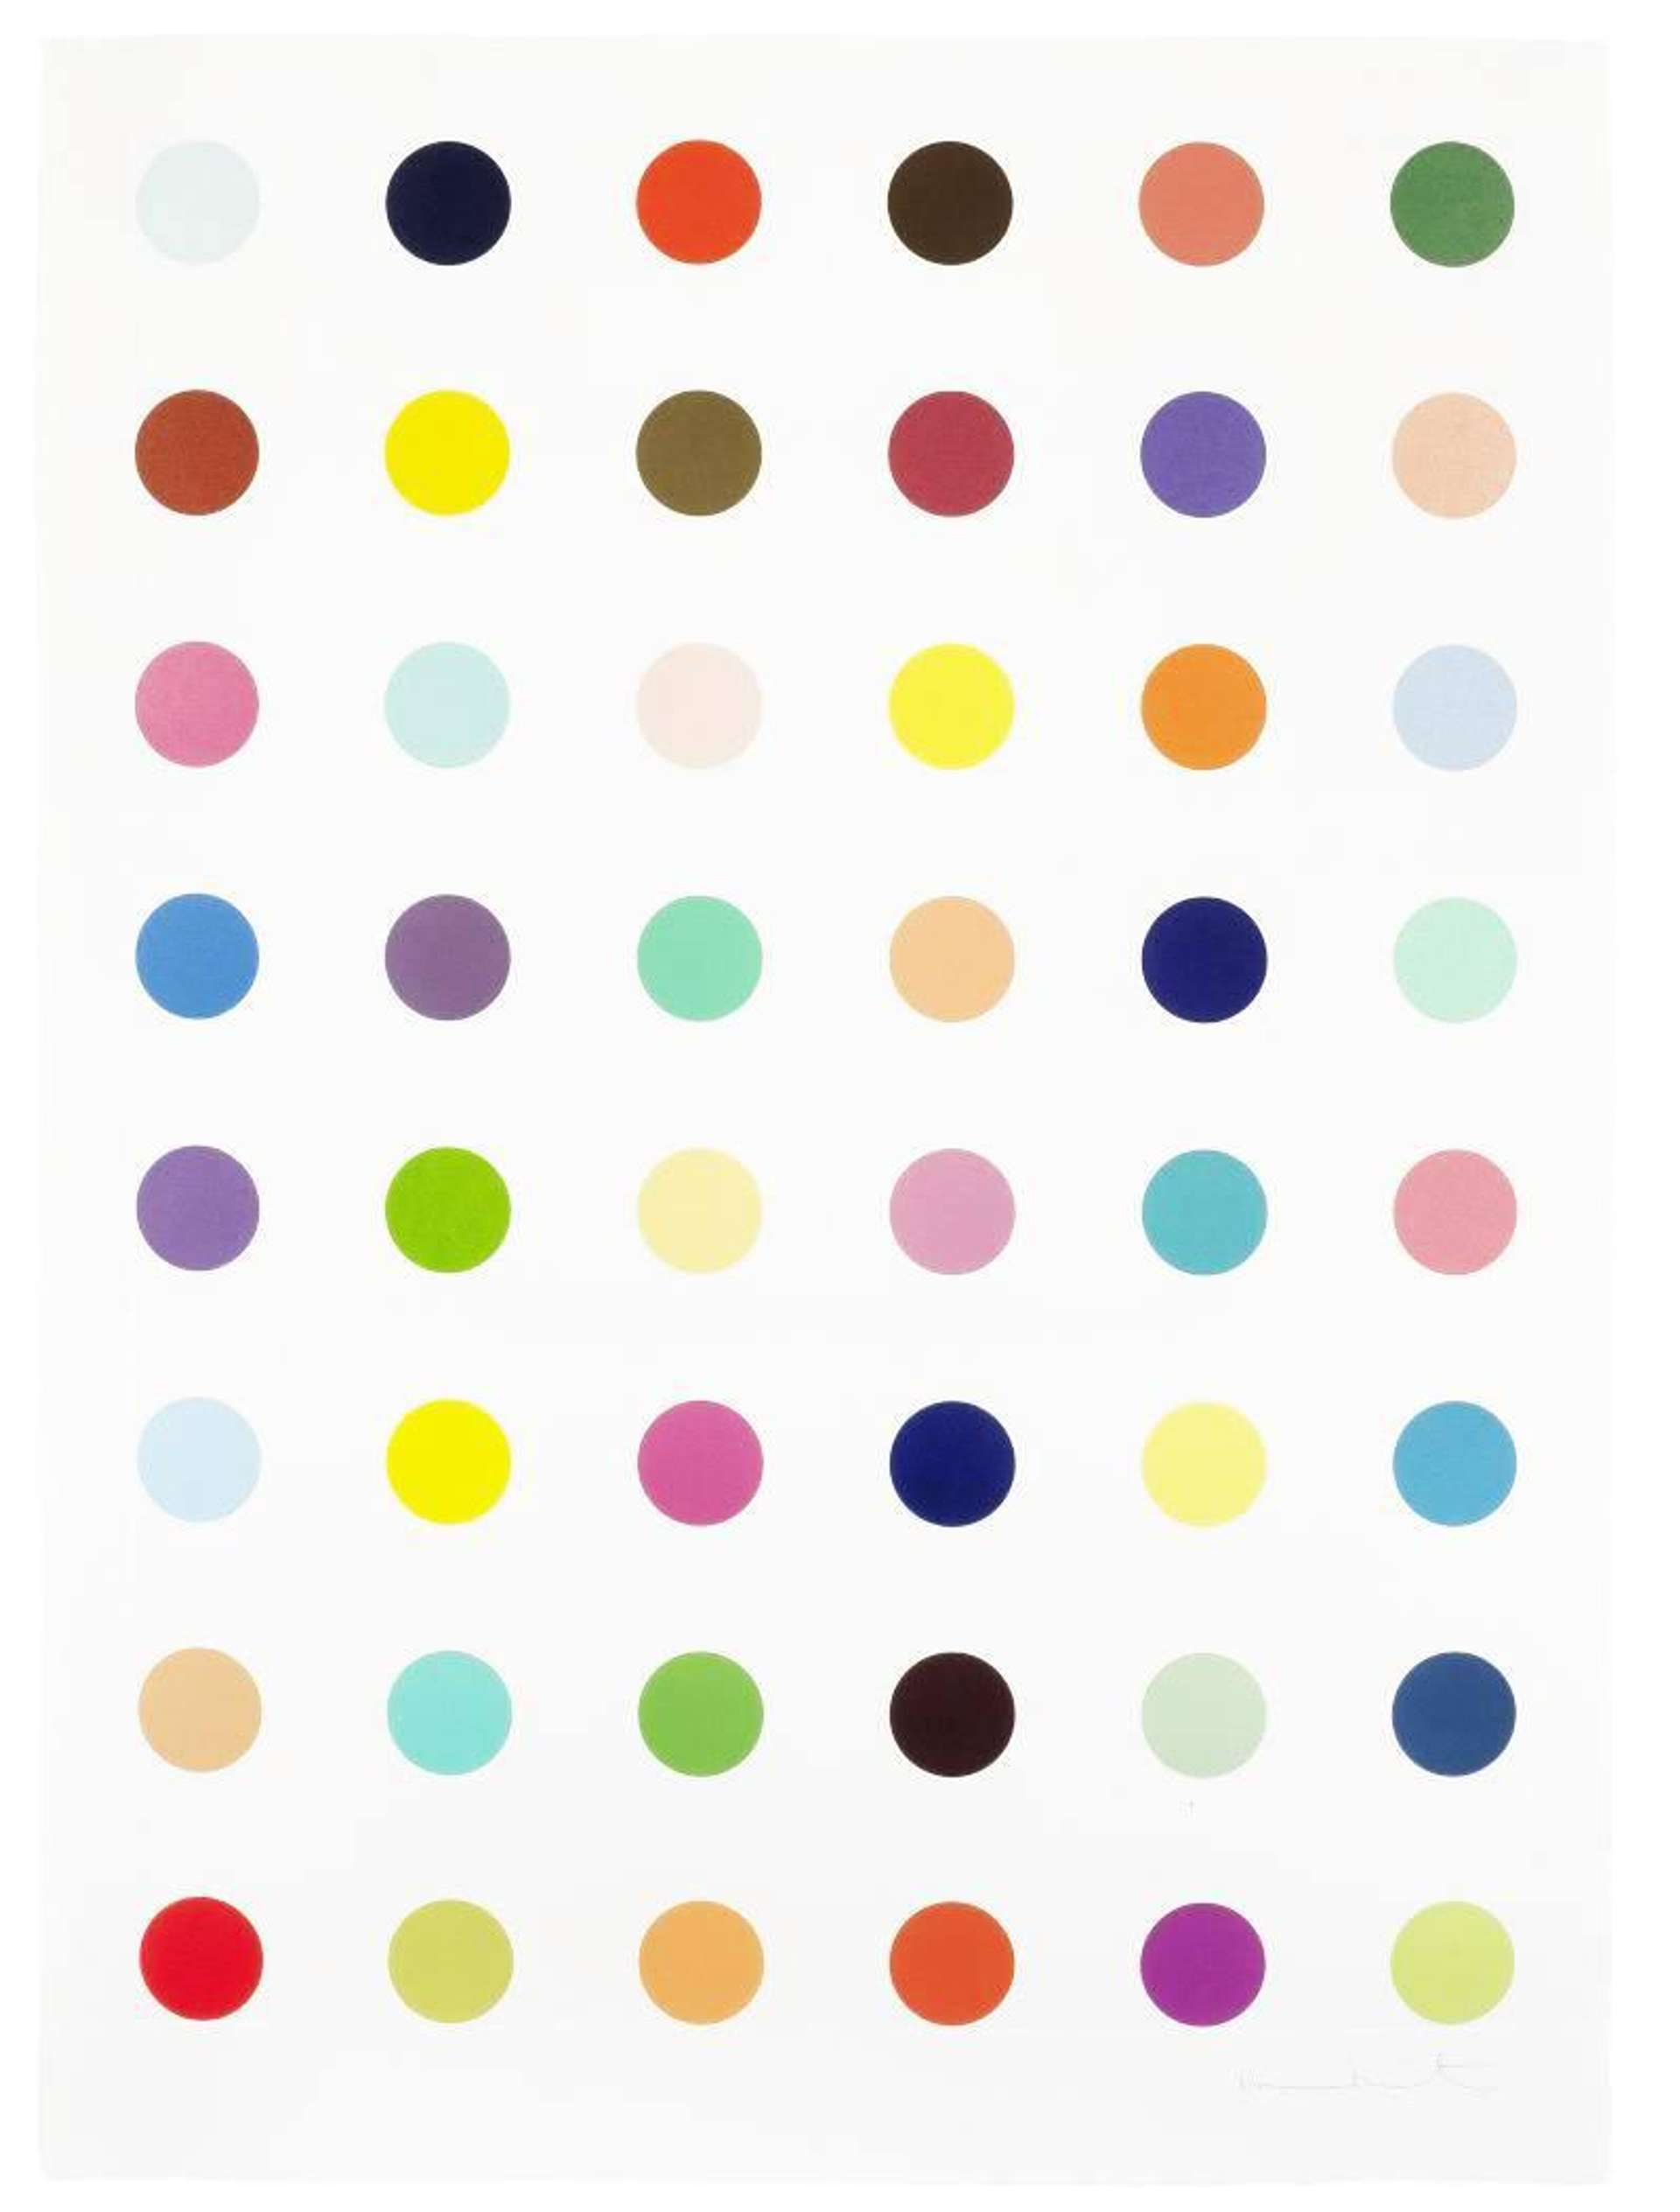 An image of the print Oleoylsarcosine by Damien Hirst, one of his famous spot paintings. Several rows of randomly coloured dots against a white background.